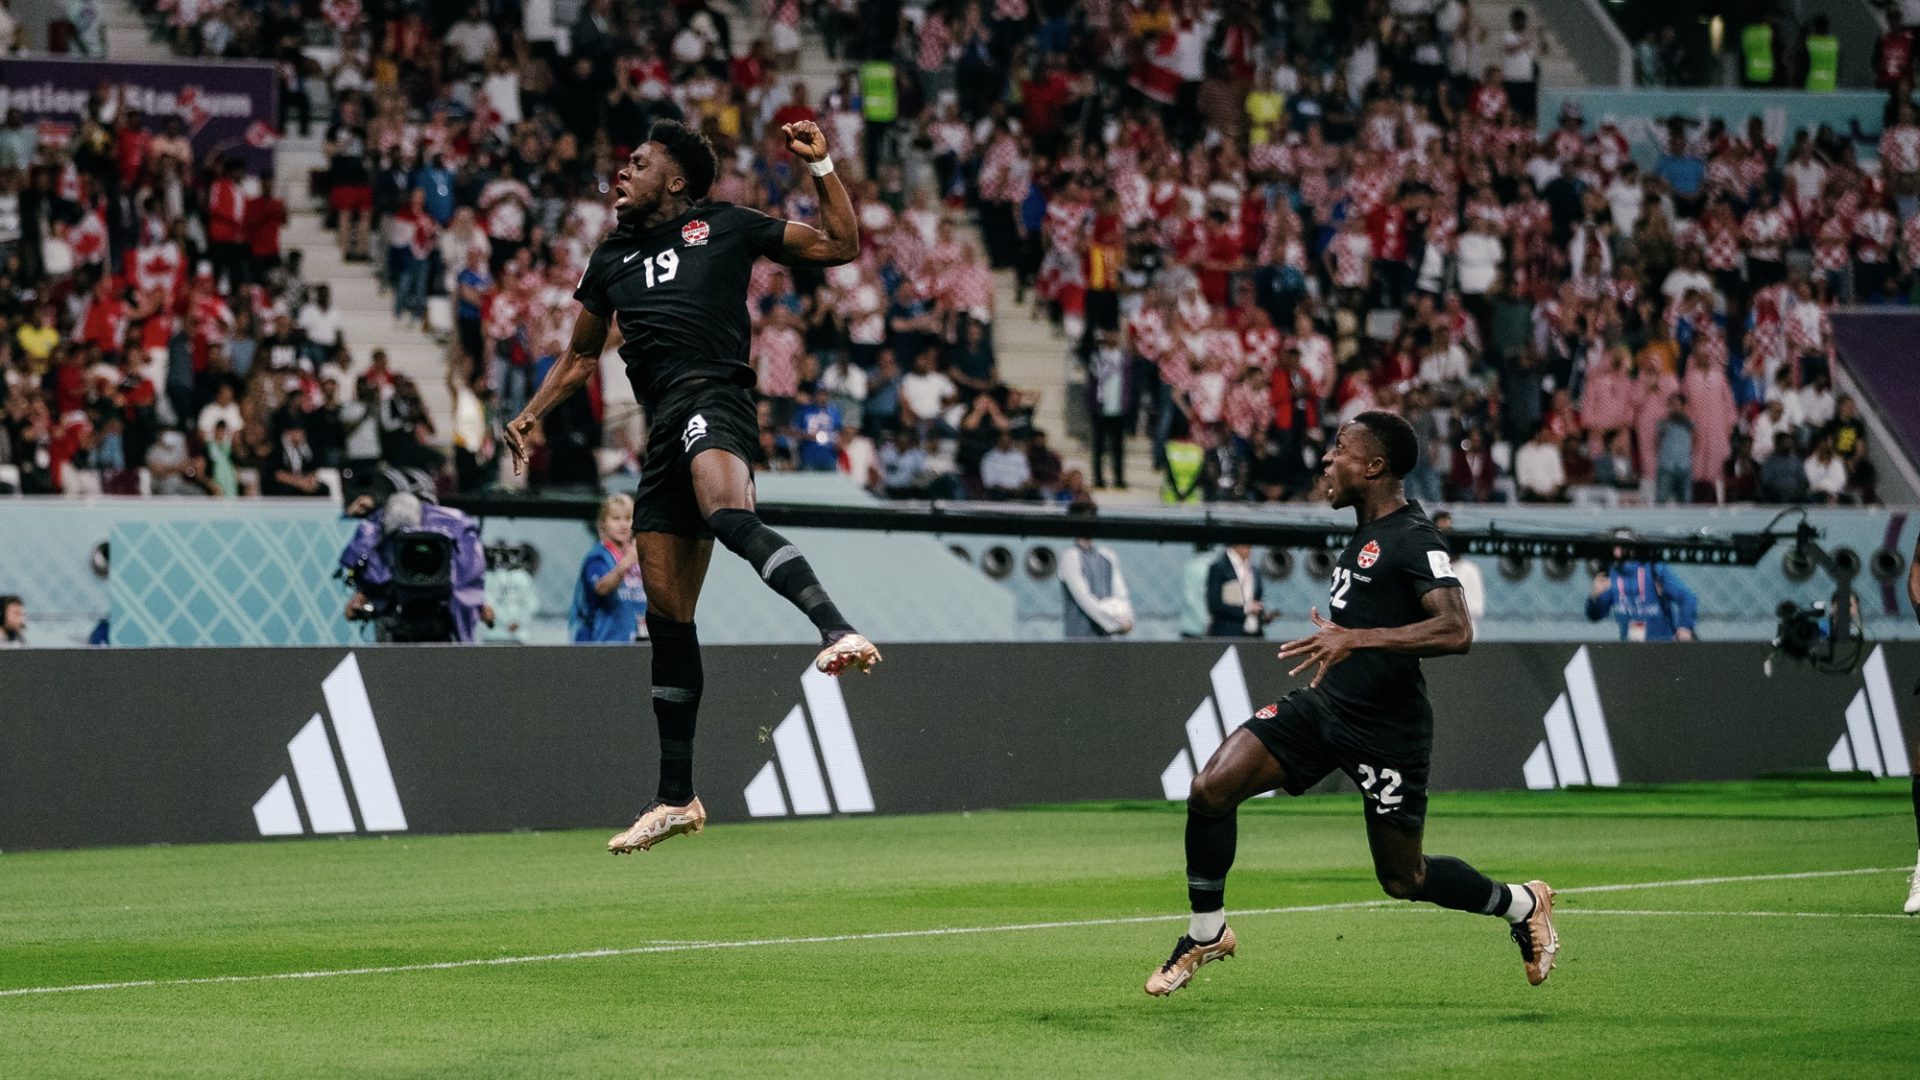 Canada scores historic first mens FIFA World Cup goal in loss to Croatia